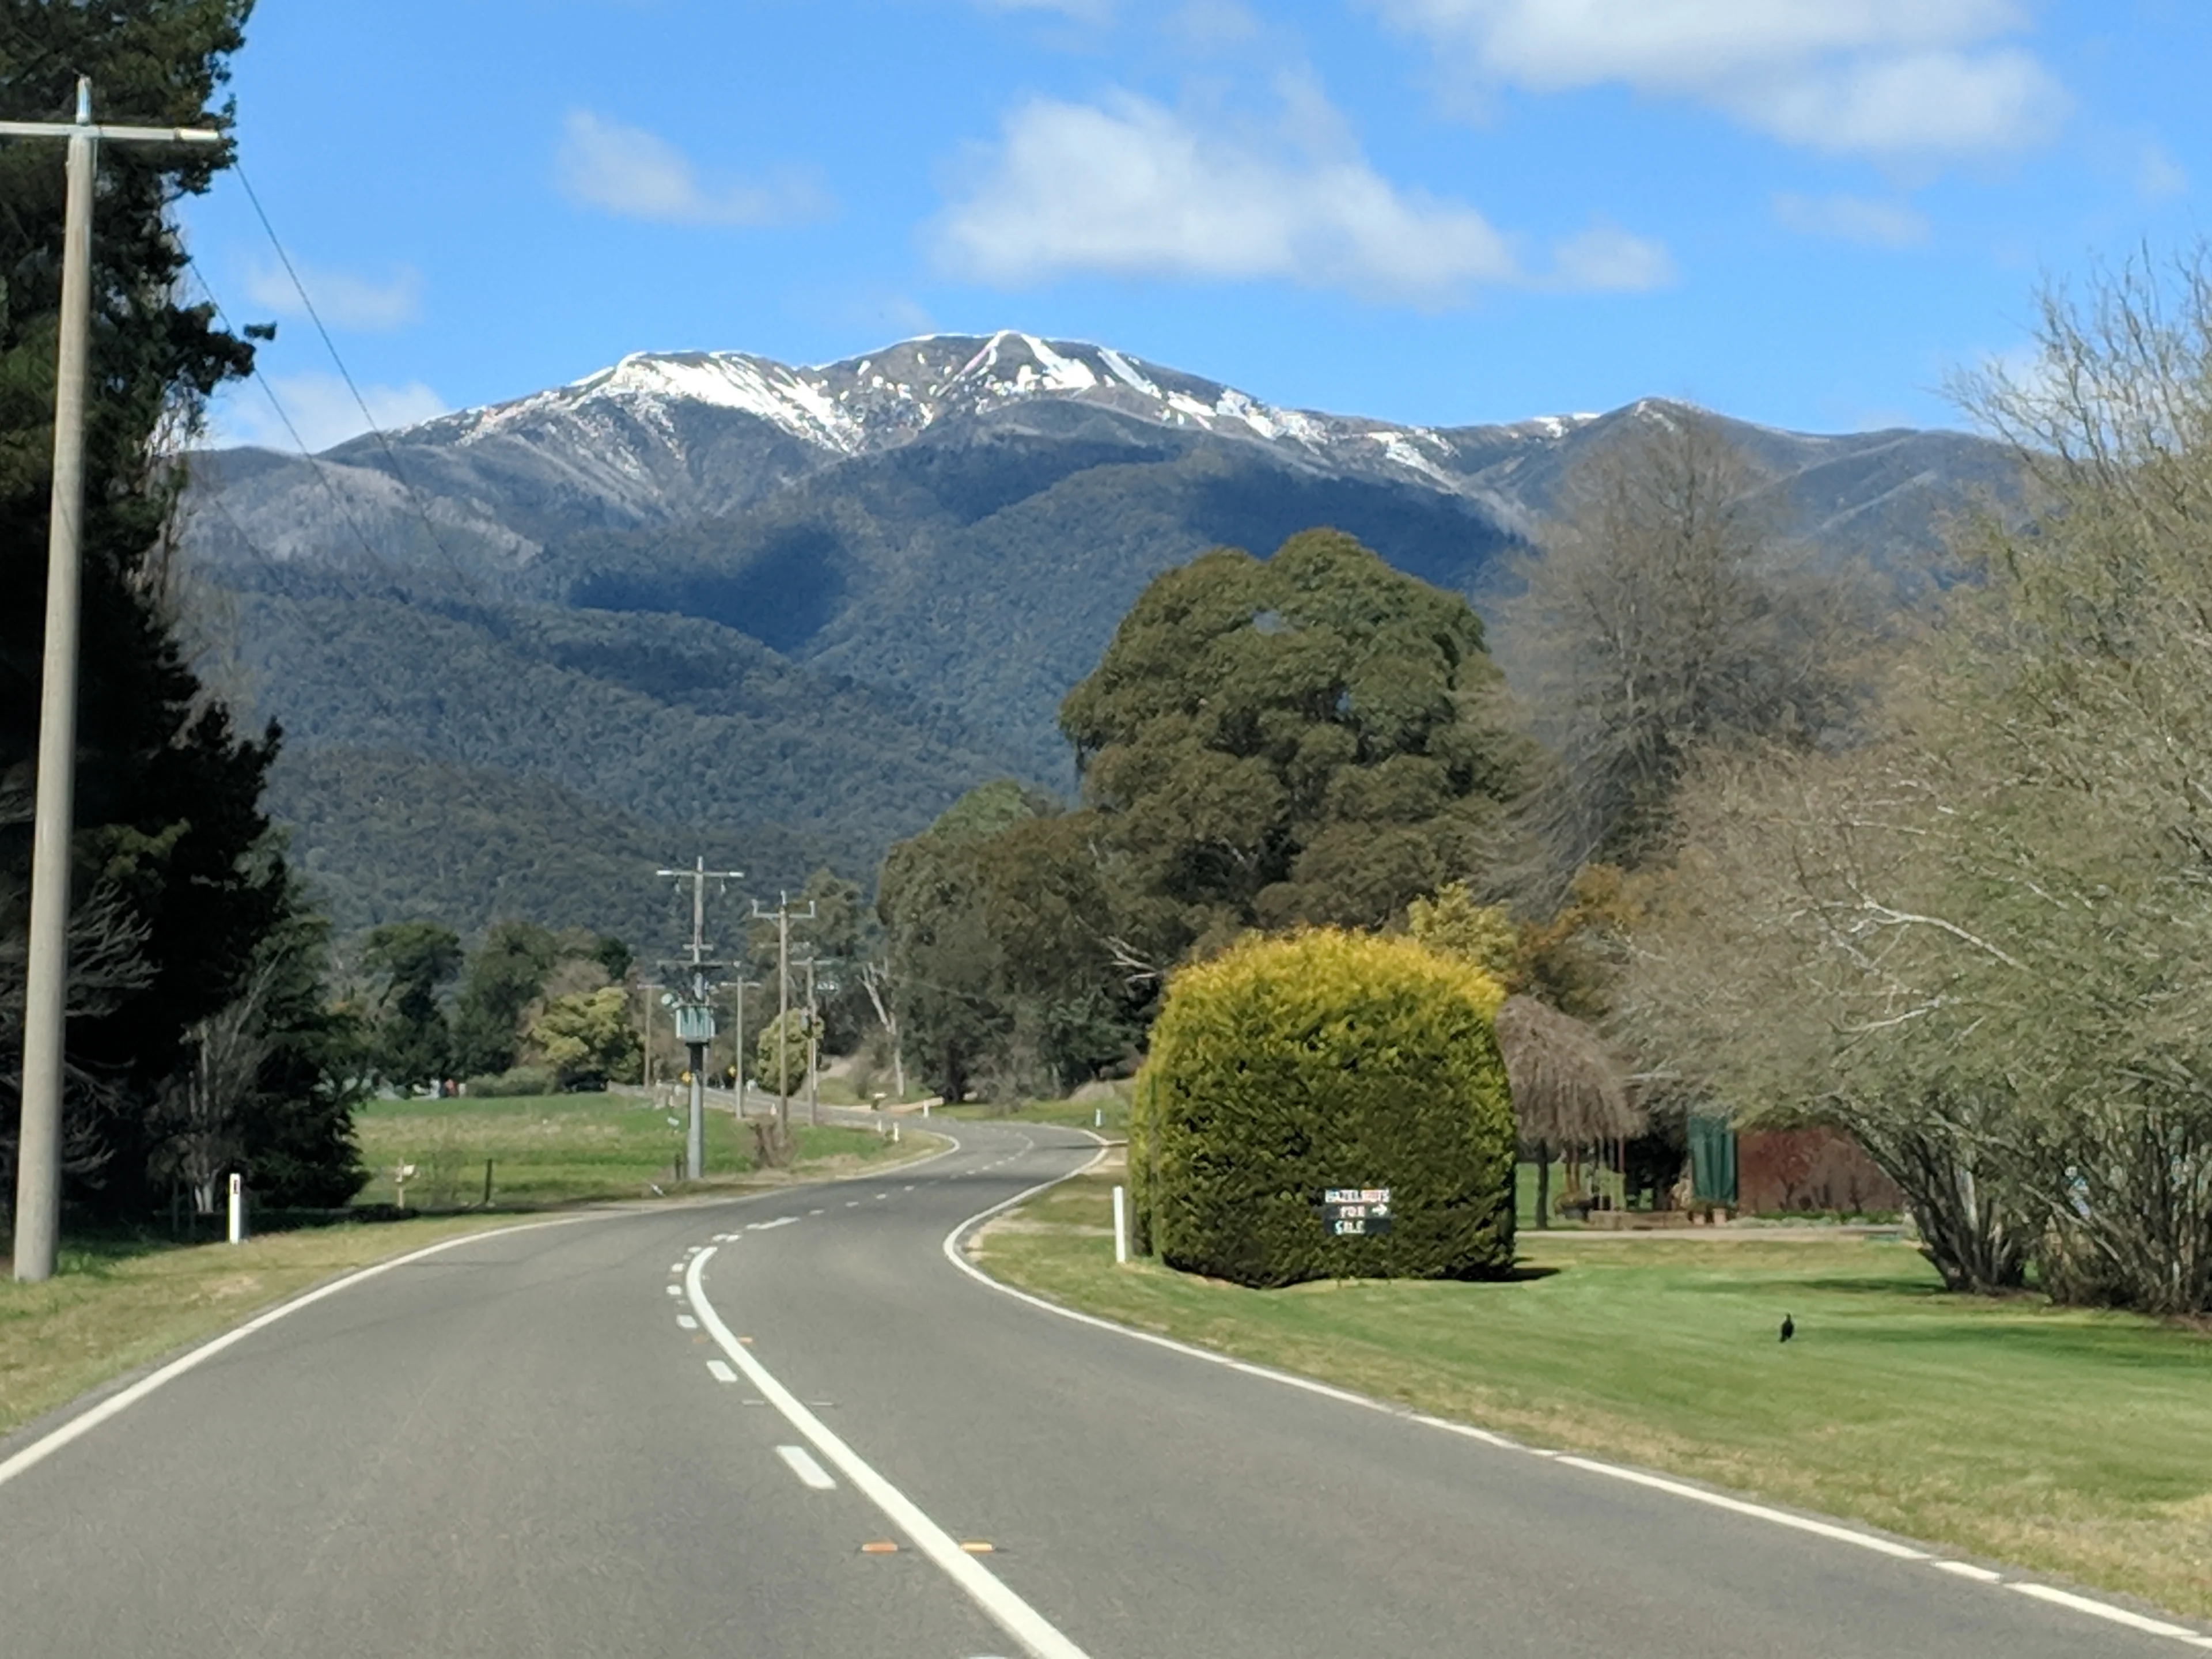 A typical view of the mountains in the Victorian High Country.